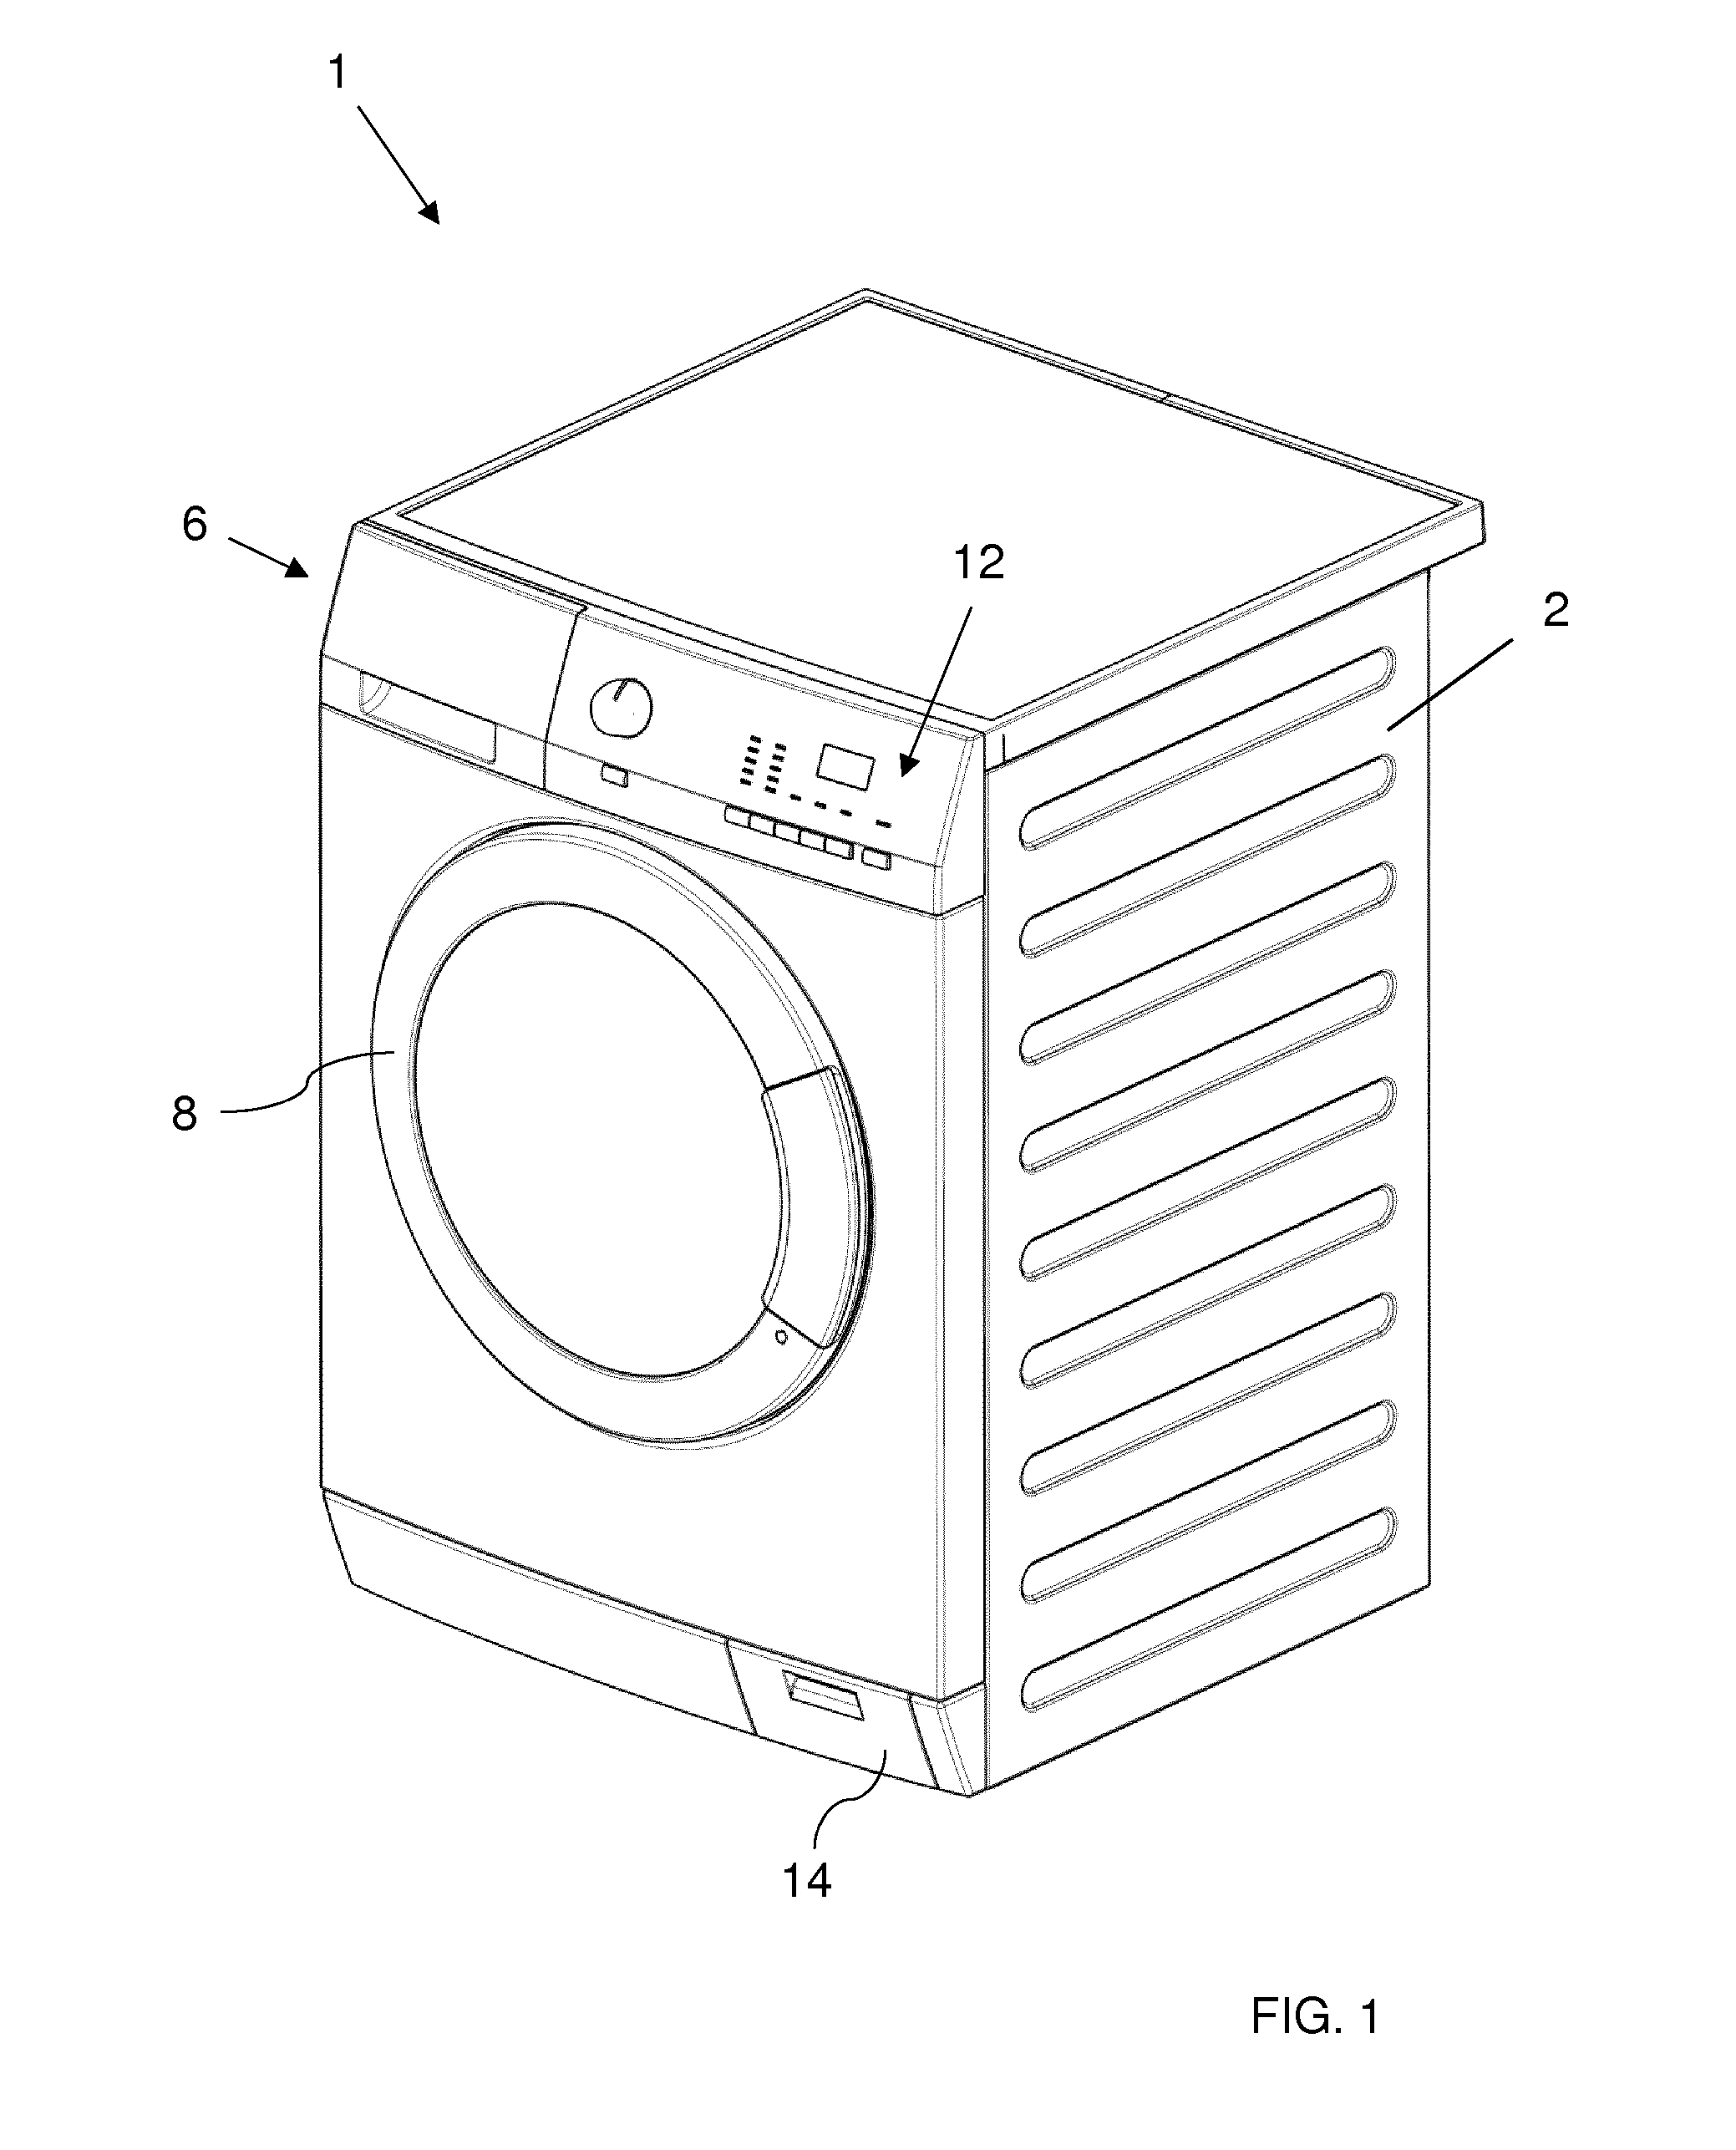 Method for Treating Laundry in a Laundry Washing Machine and Laundry Washing Machine